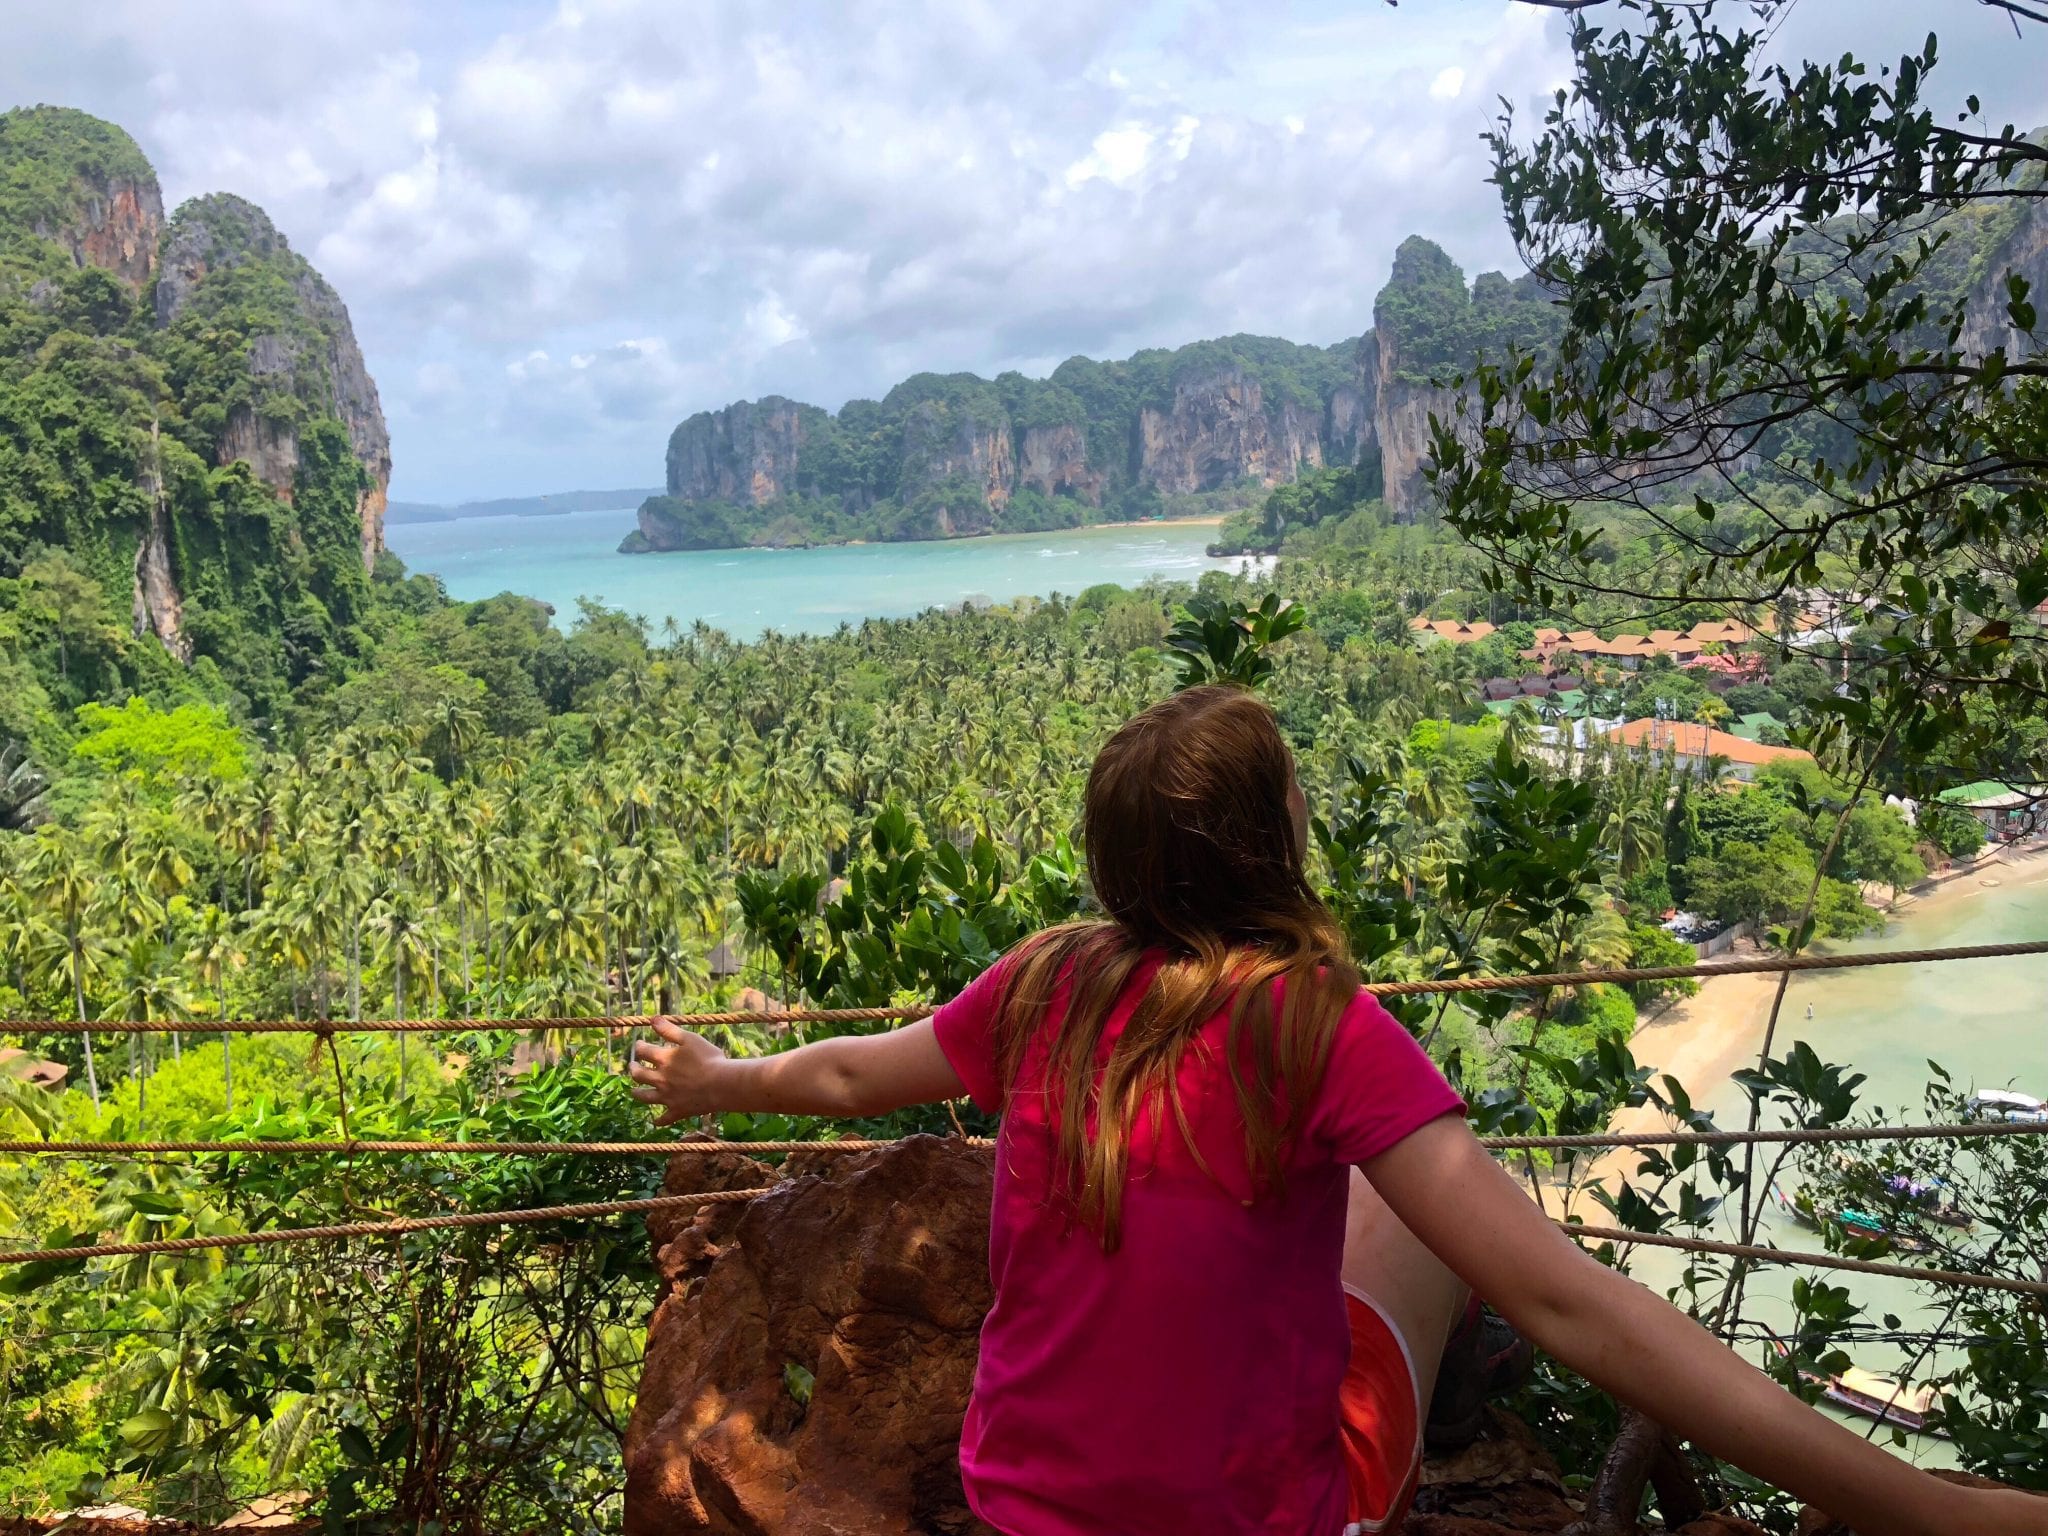 Hiking to Railay viewpoint with kids